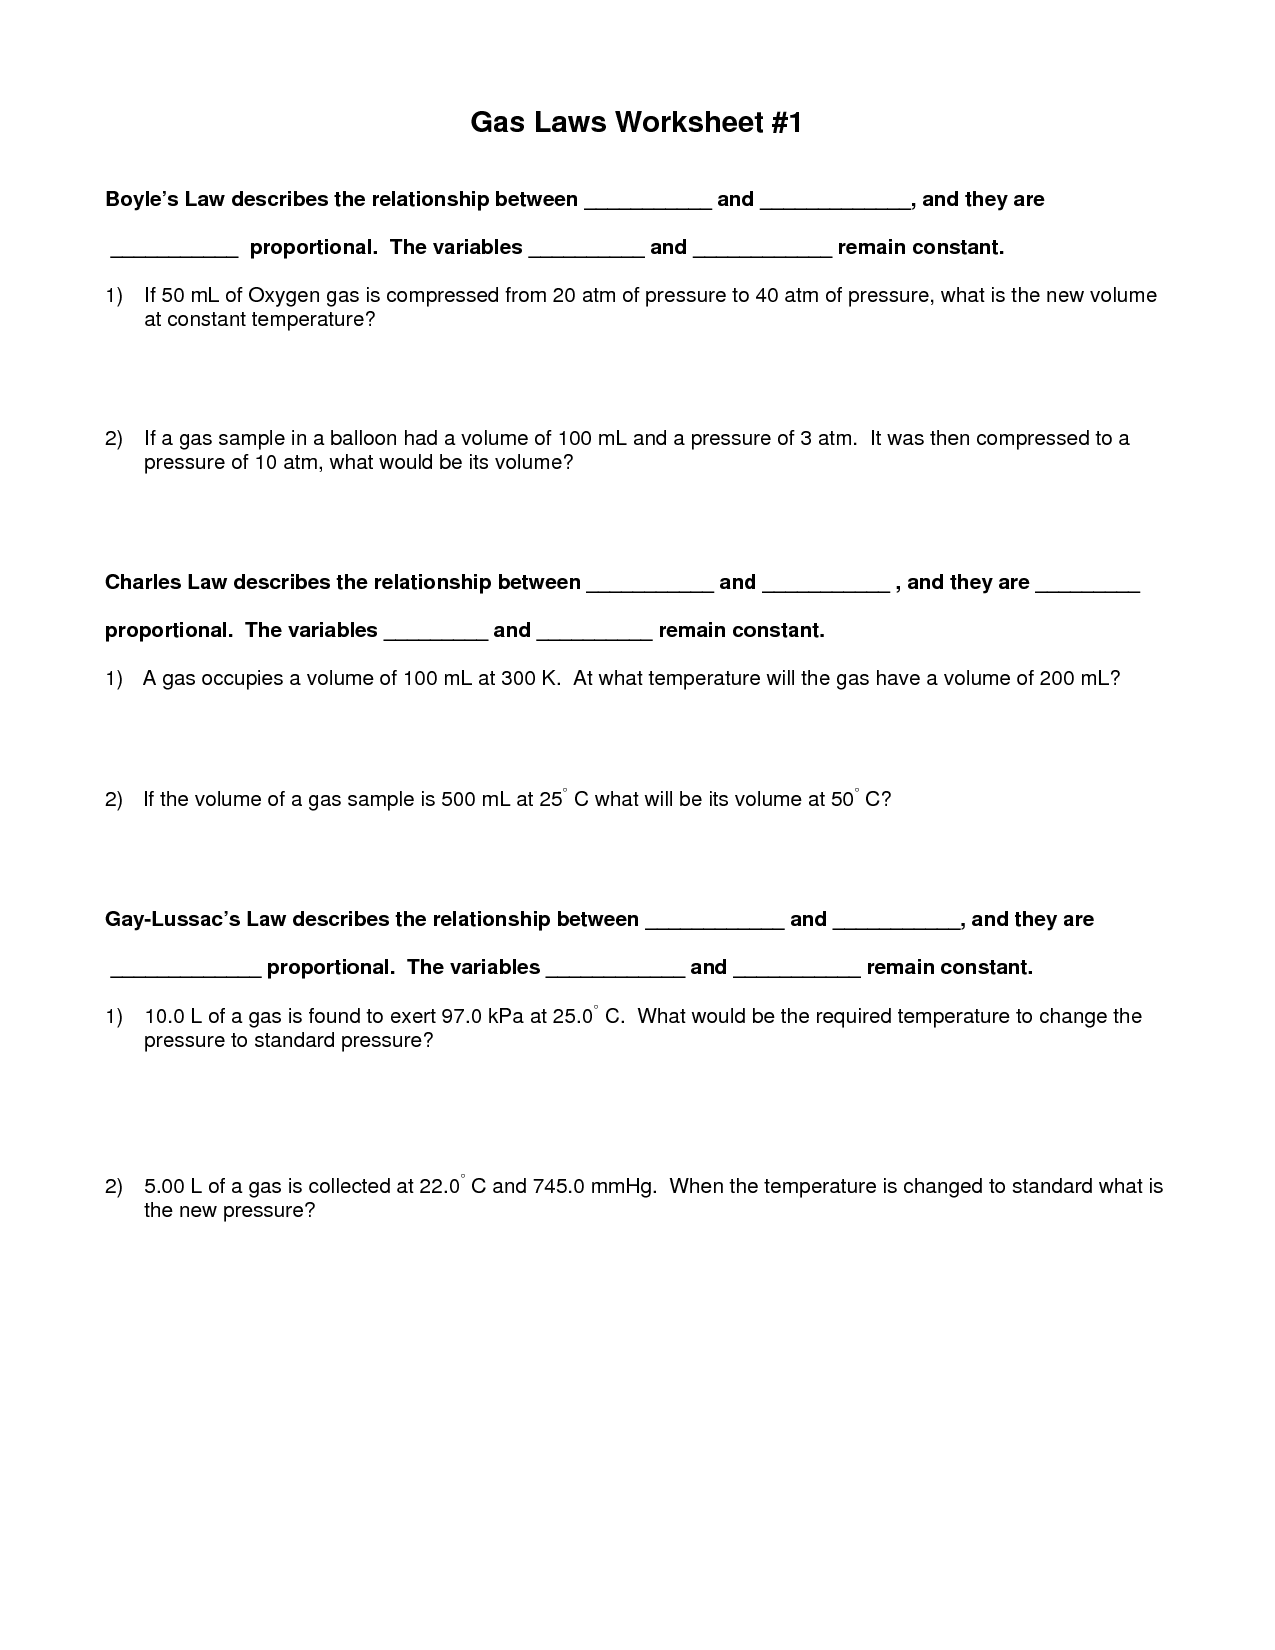 Charles Law Worksheet Answers